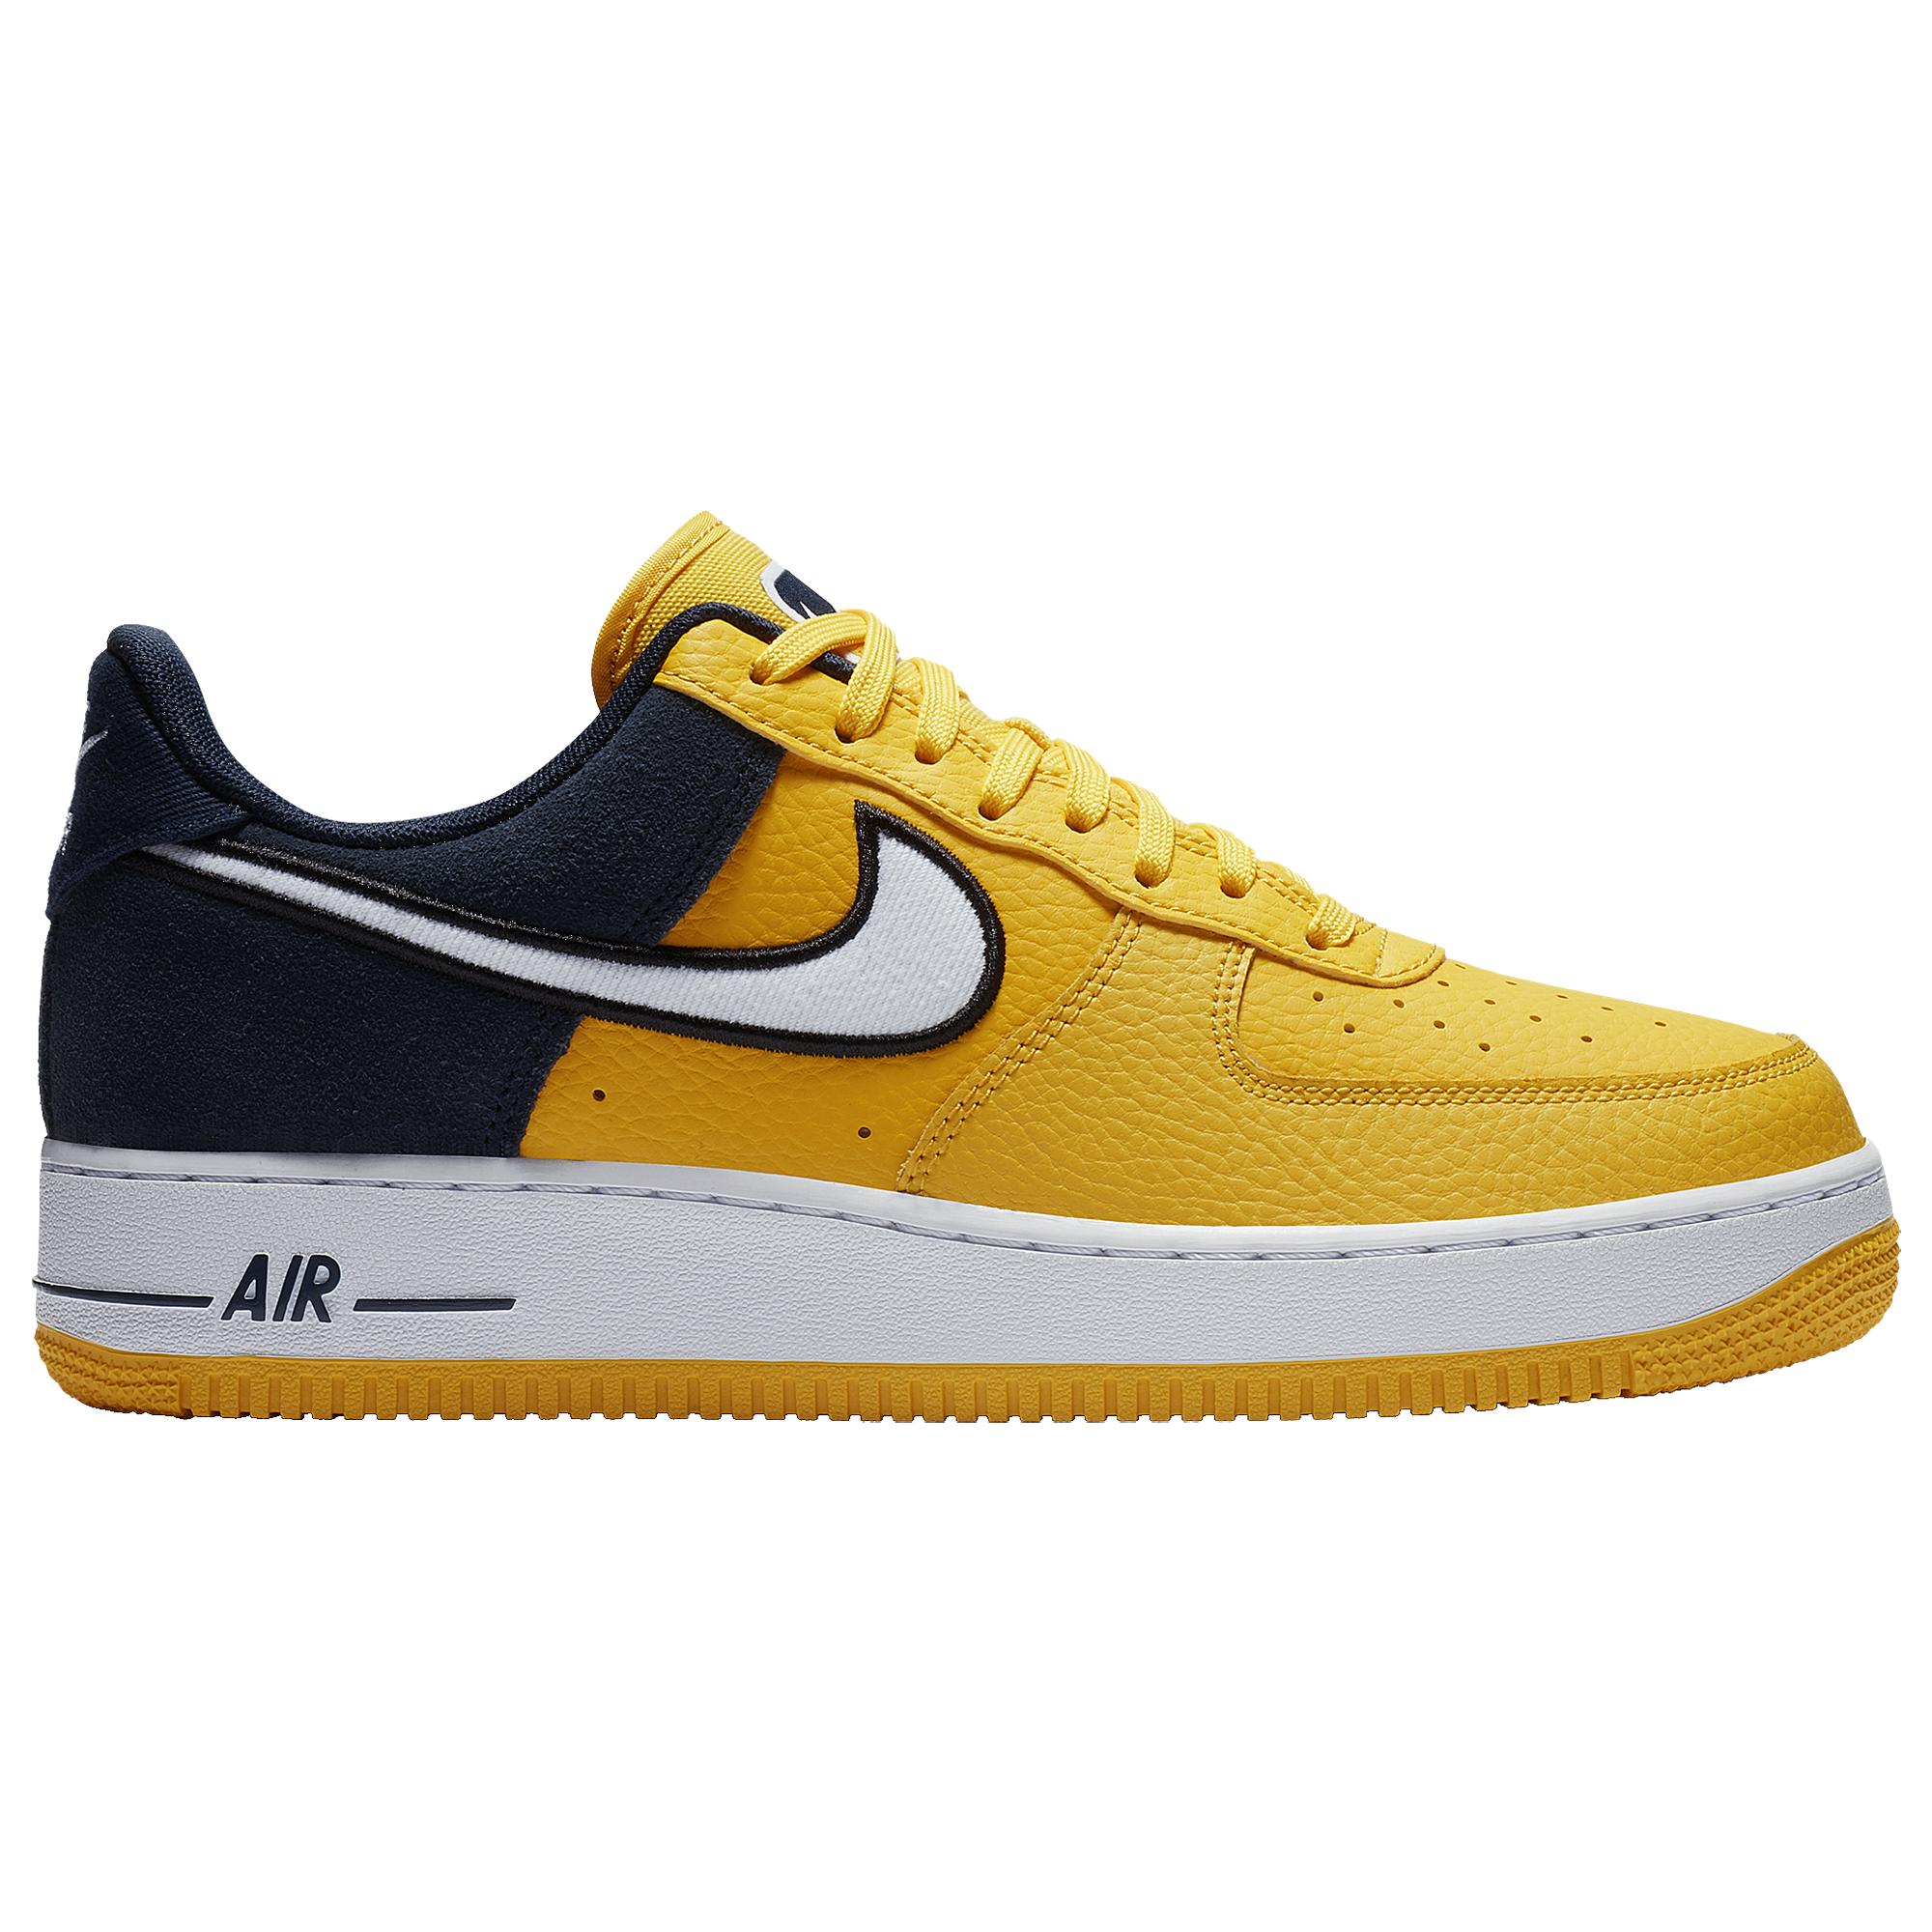 Nike Air Force 1 Lv8 for Men - Lyst